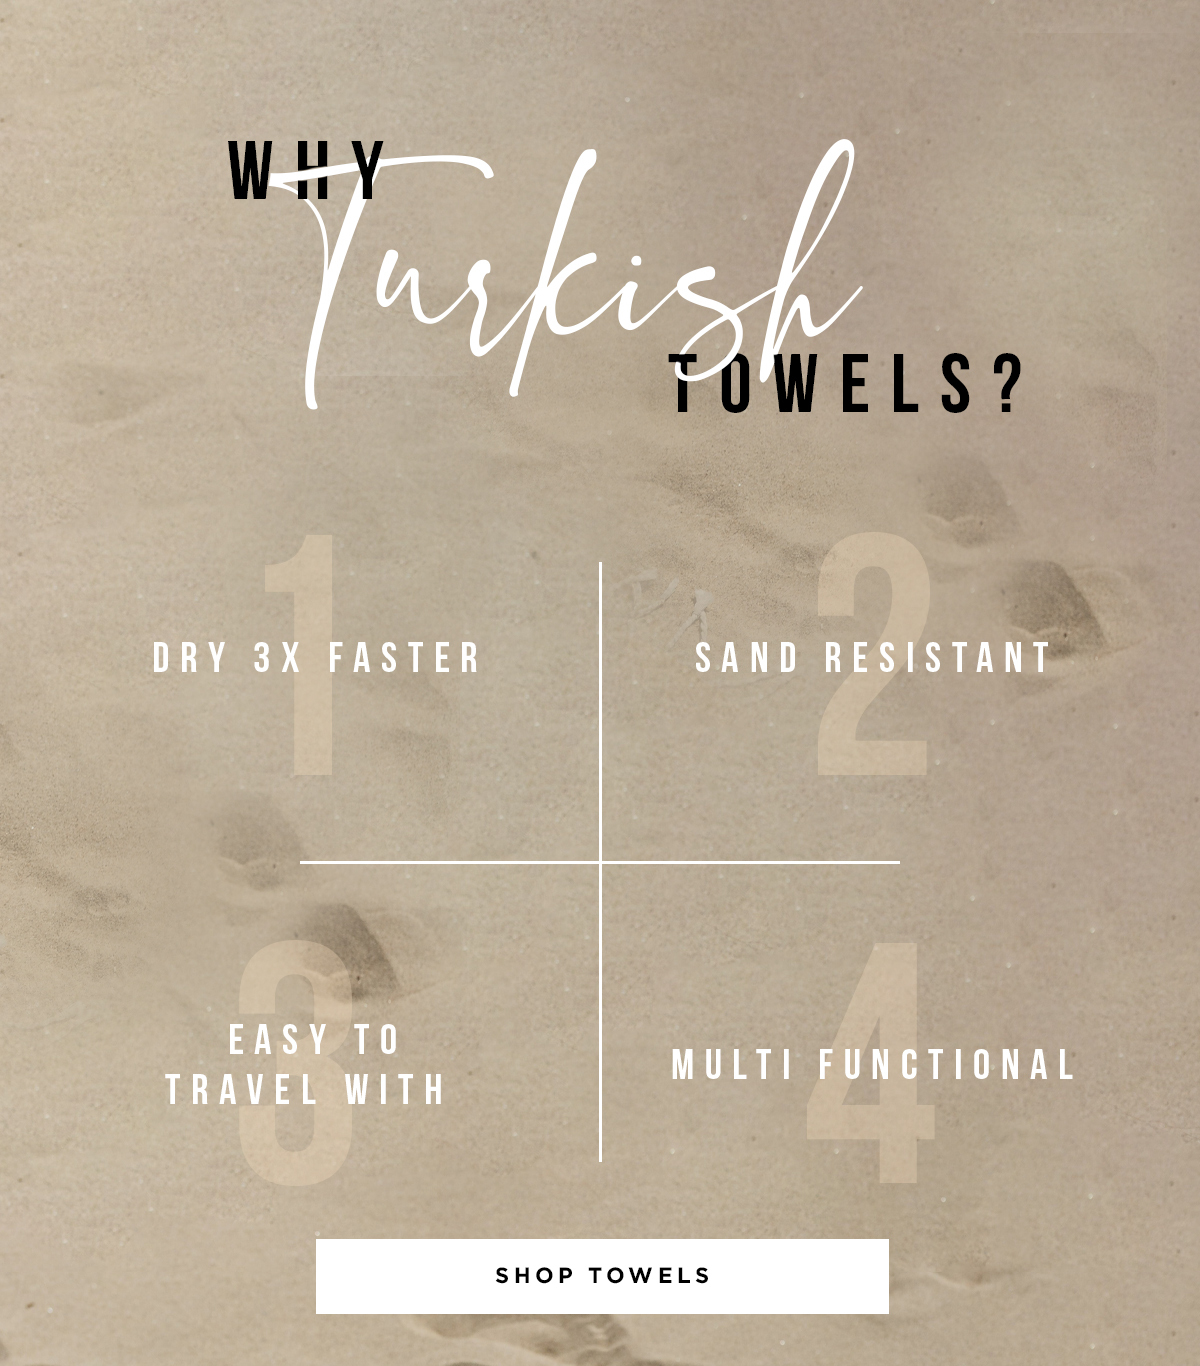 Why Turkish Towels? They dry 3x faster, are sand resistant, easy to travel with and multi functional.